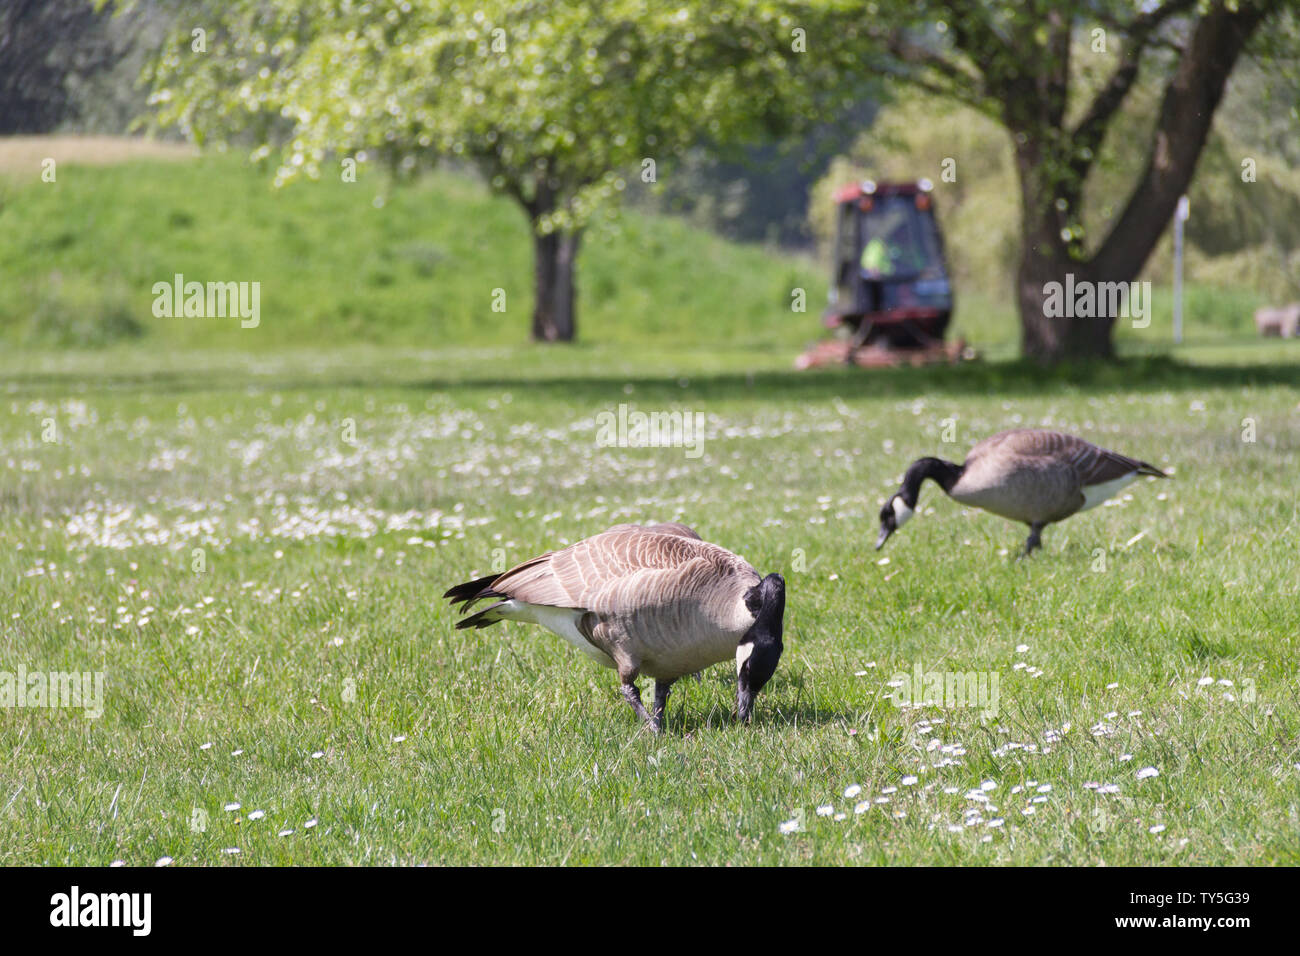 Two wild geese are in the middle of consuming on the grass field while a park attendant operate.a lawn mower behind them in the park. Stock Photo